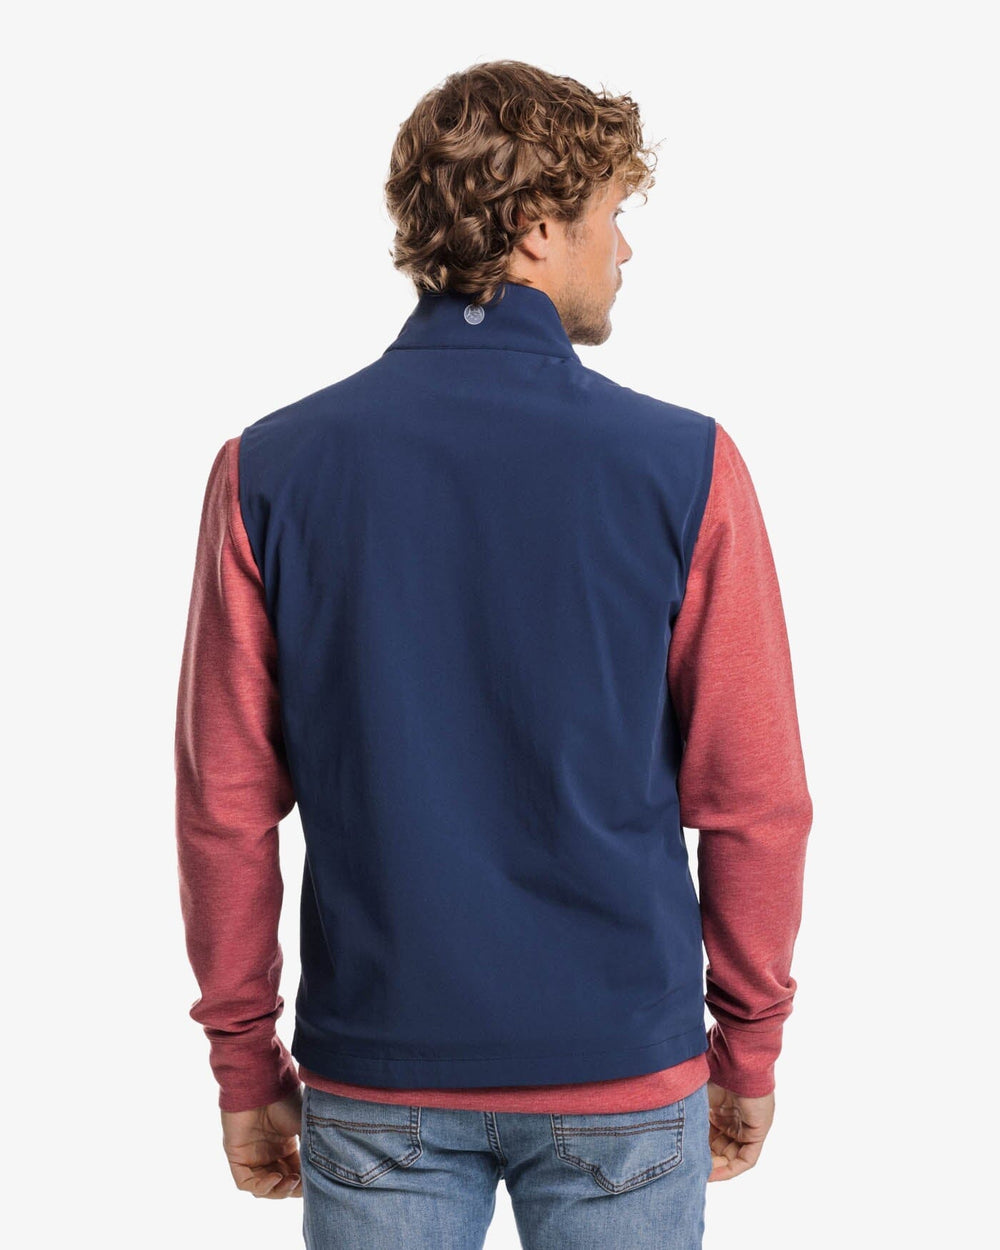 The back view of the Southern Tide Bowline Performance Vest by Southern Tide - Dress Blue